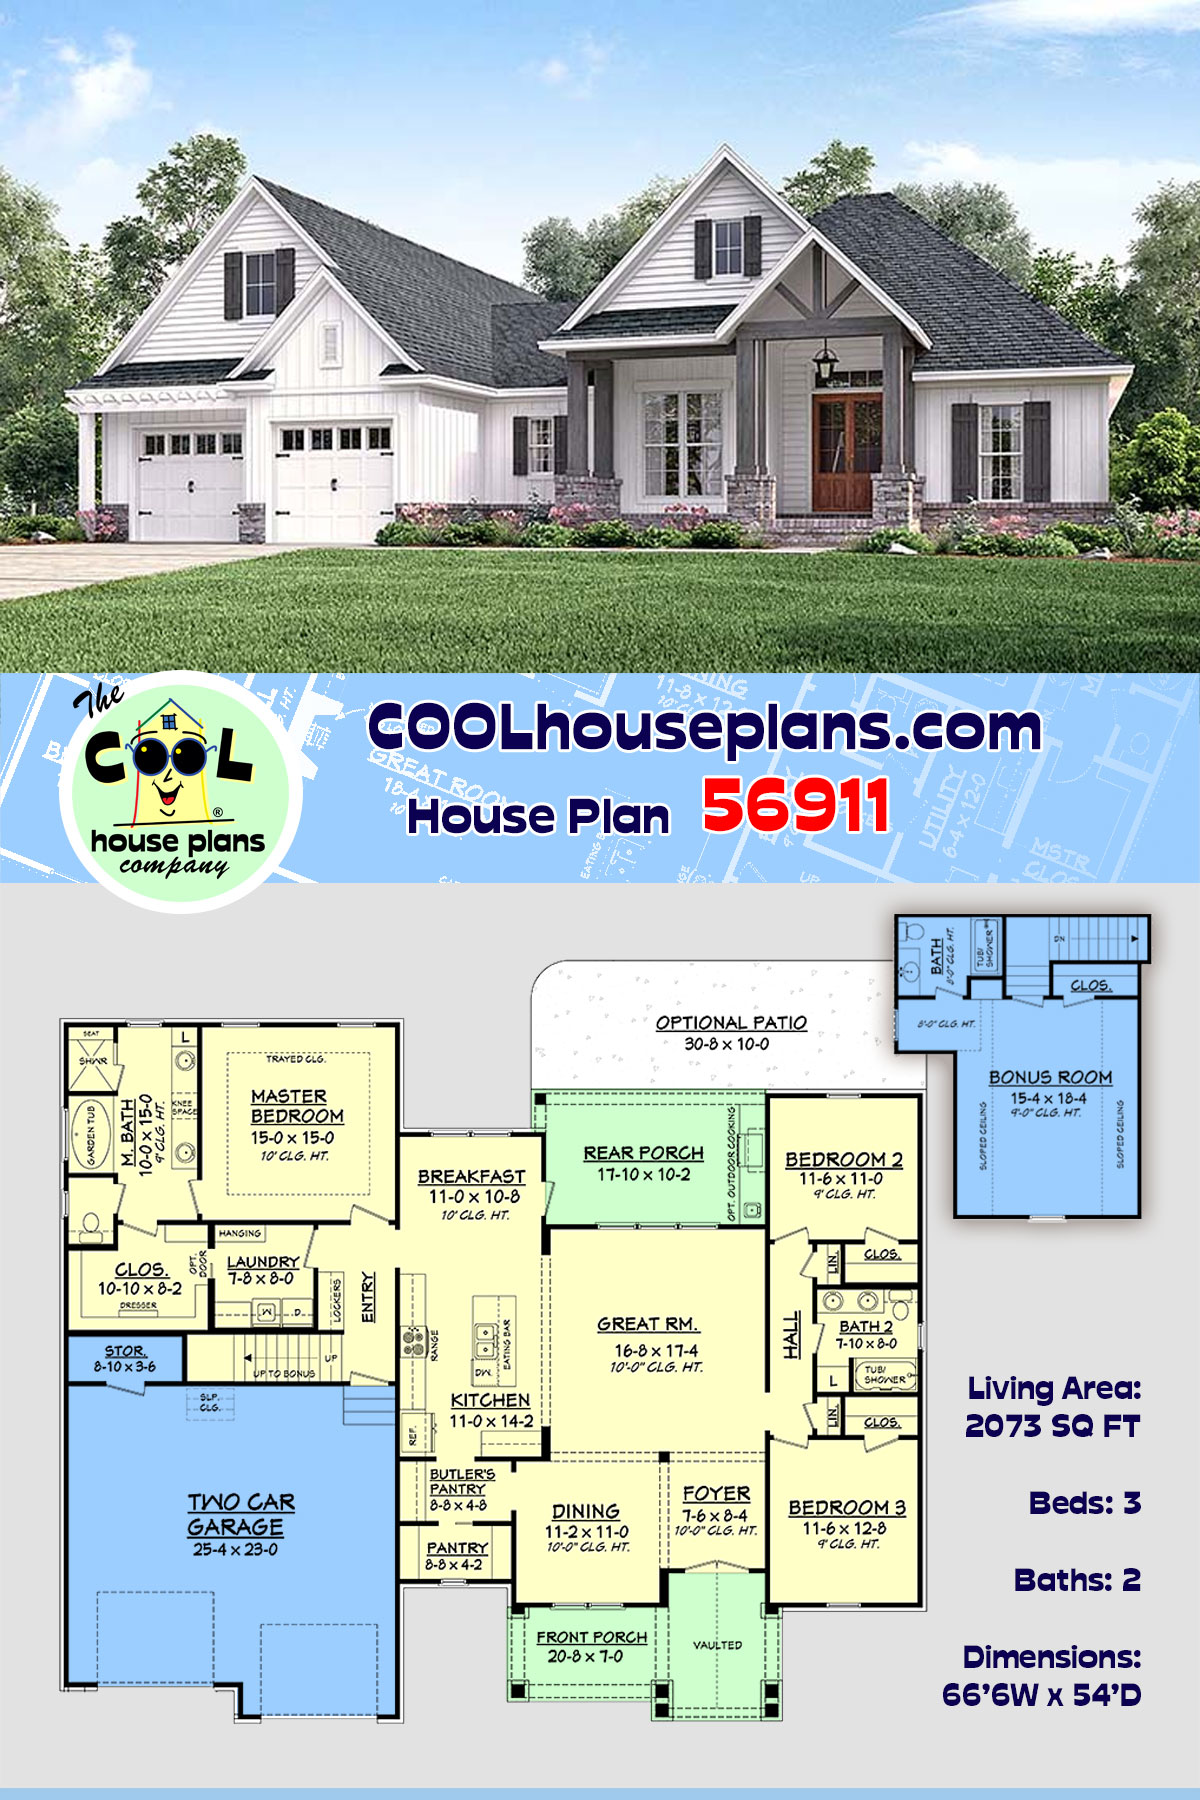 Country, Craftsman, Southern, Traditional House Plan 56911 with 3 Beds, 2 Baths, 2 Car Garage